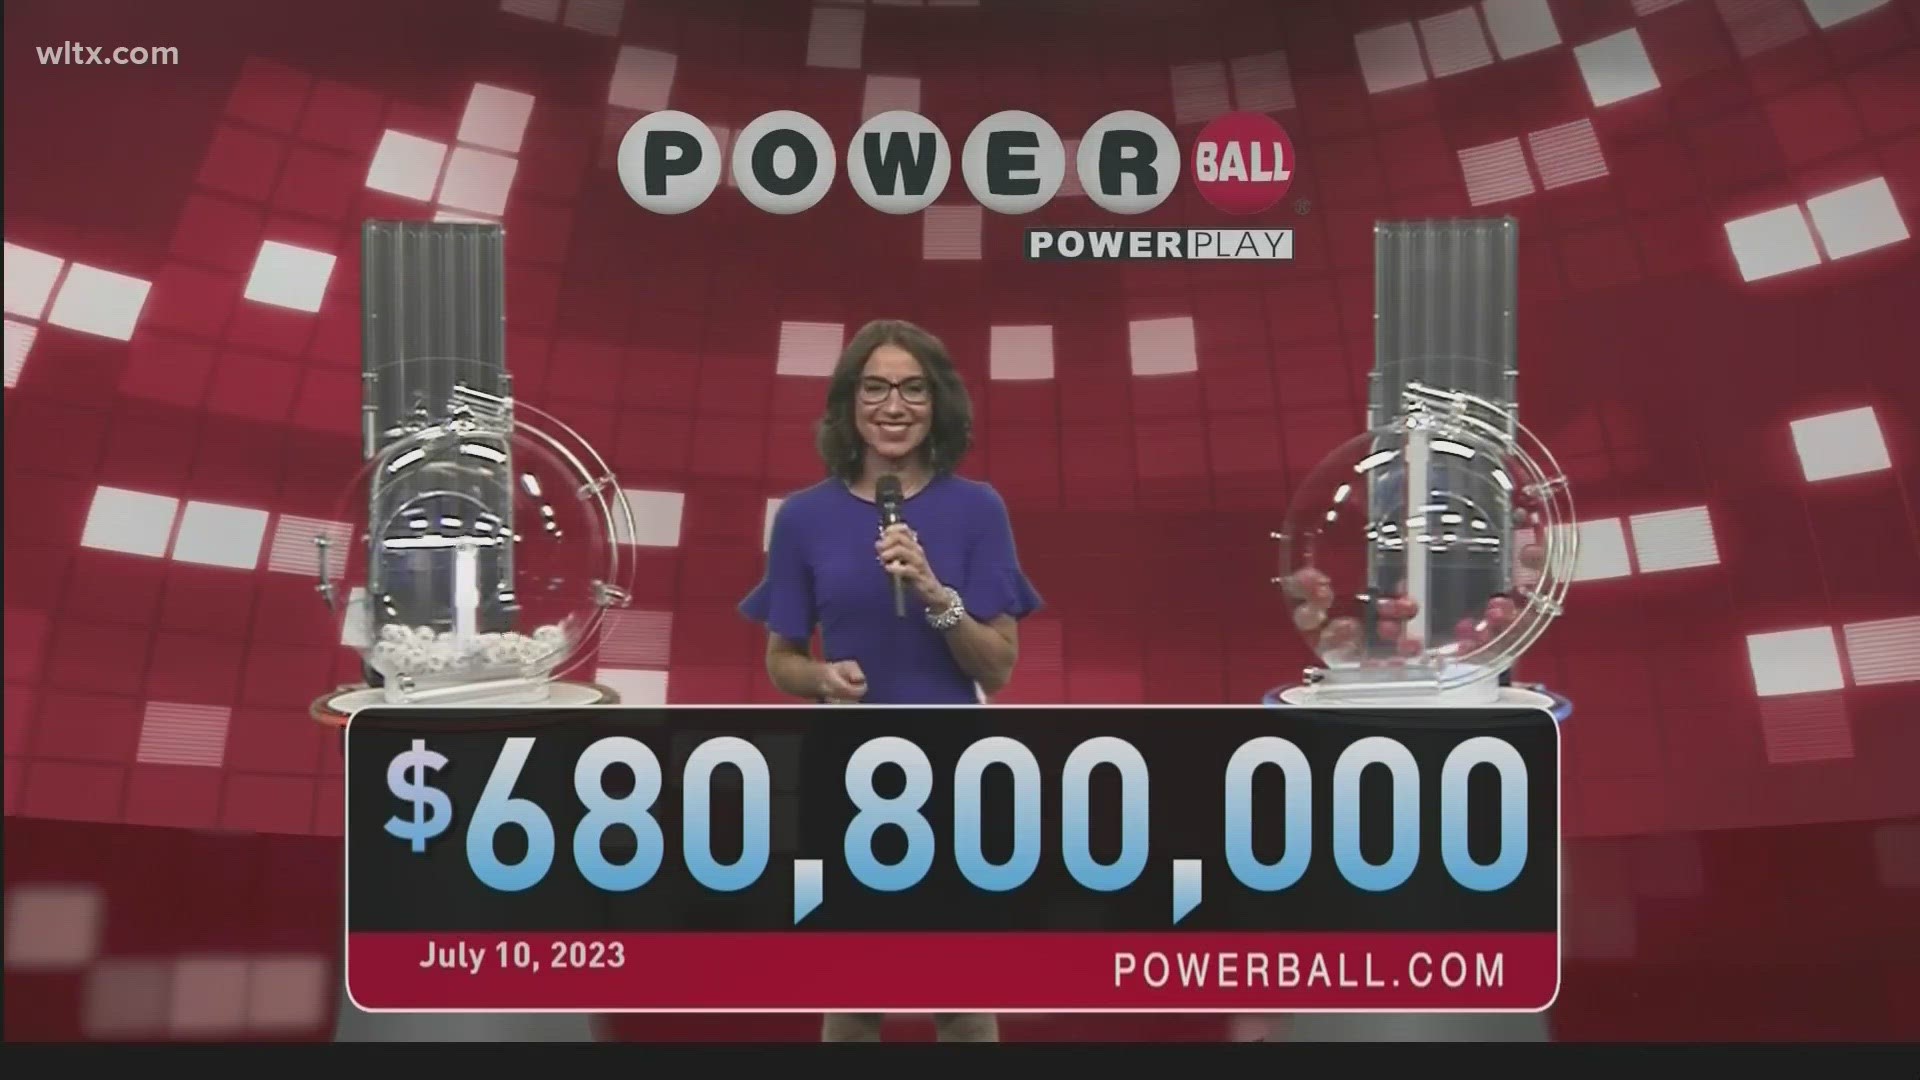 Powerball winning numbers for July 10, 2023